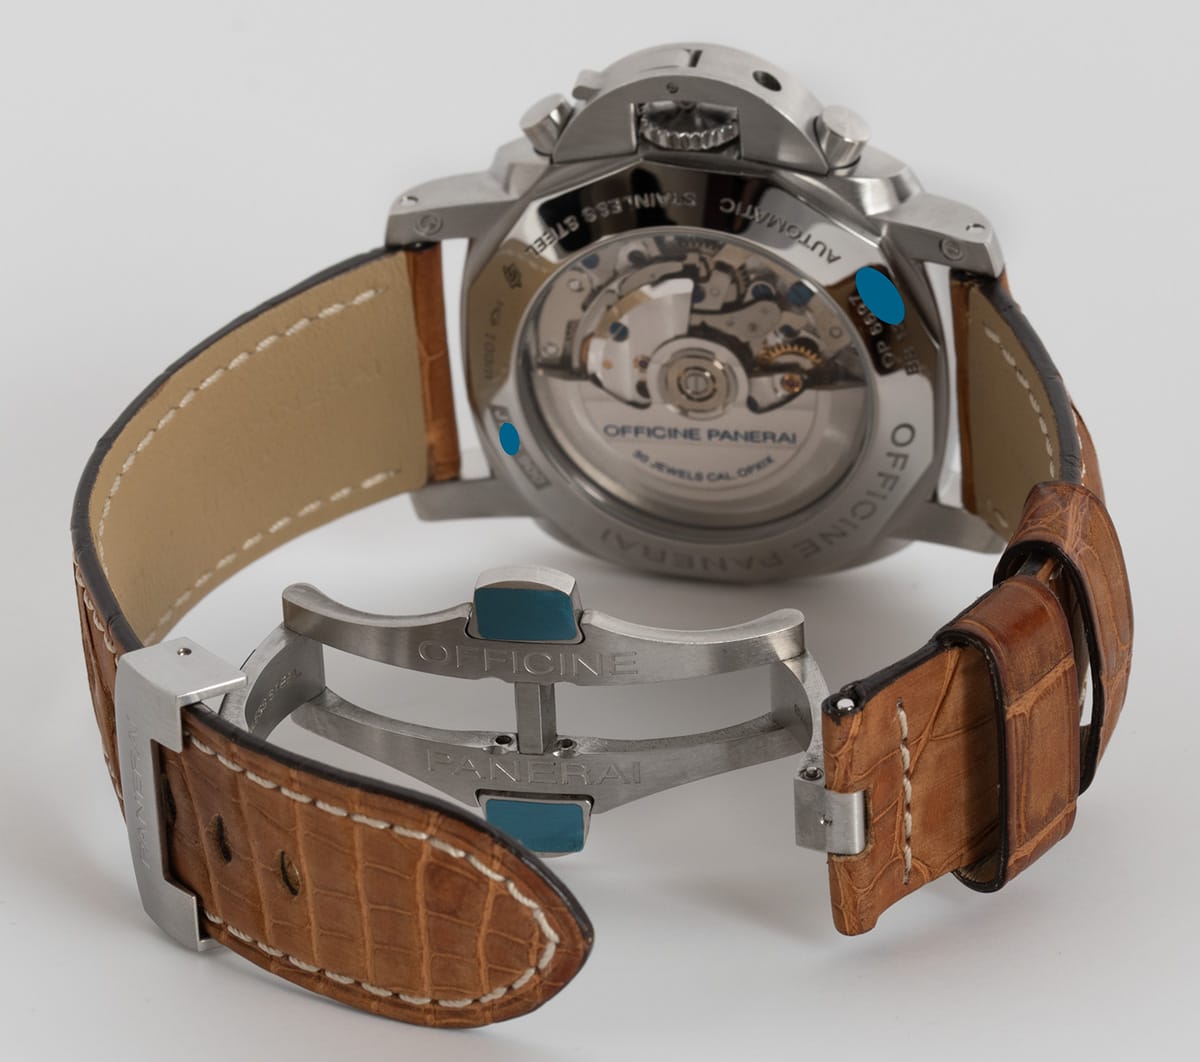 Open Clasp Shot of Luminor 1950 Flyback Chronograph